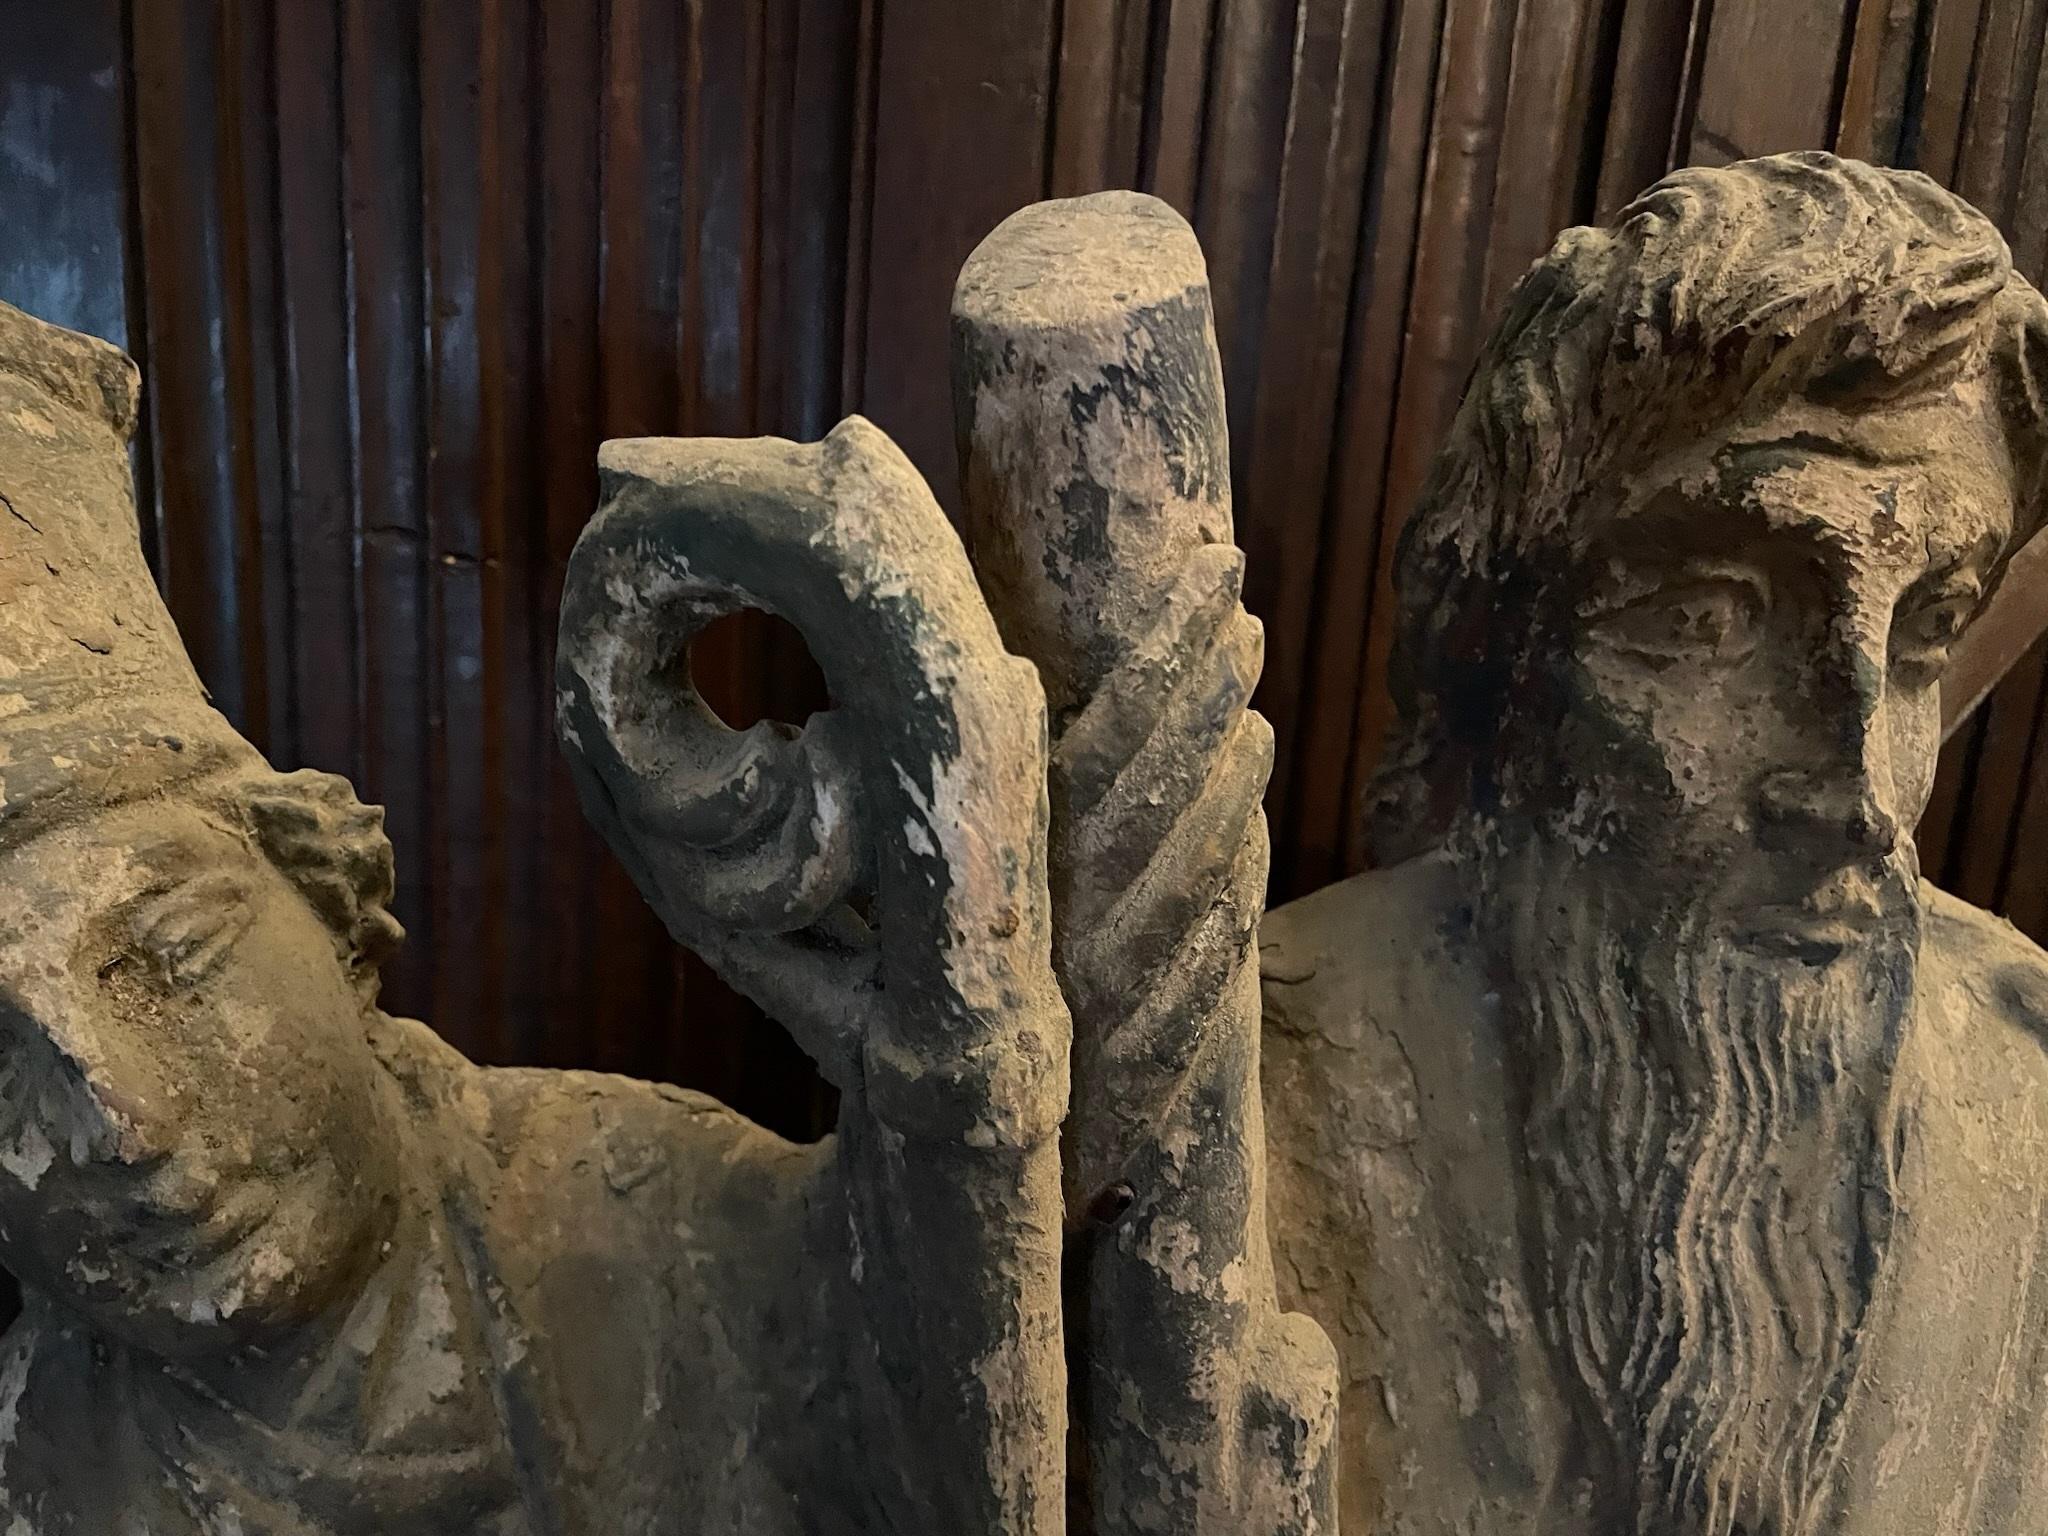 Medieval style carved sculpture of three religious figures, possibly saints. The sculpture is in the style of Gothic religious art from continental Europe, particularly Germany and Flanders. We believe the sculpture dates between the 16th century